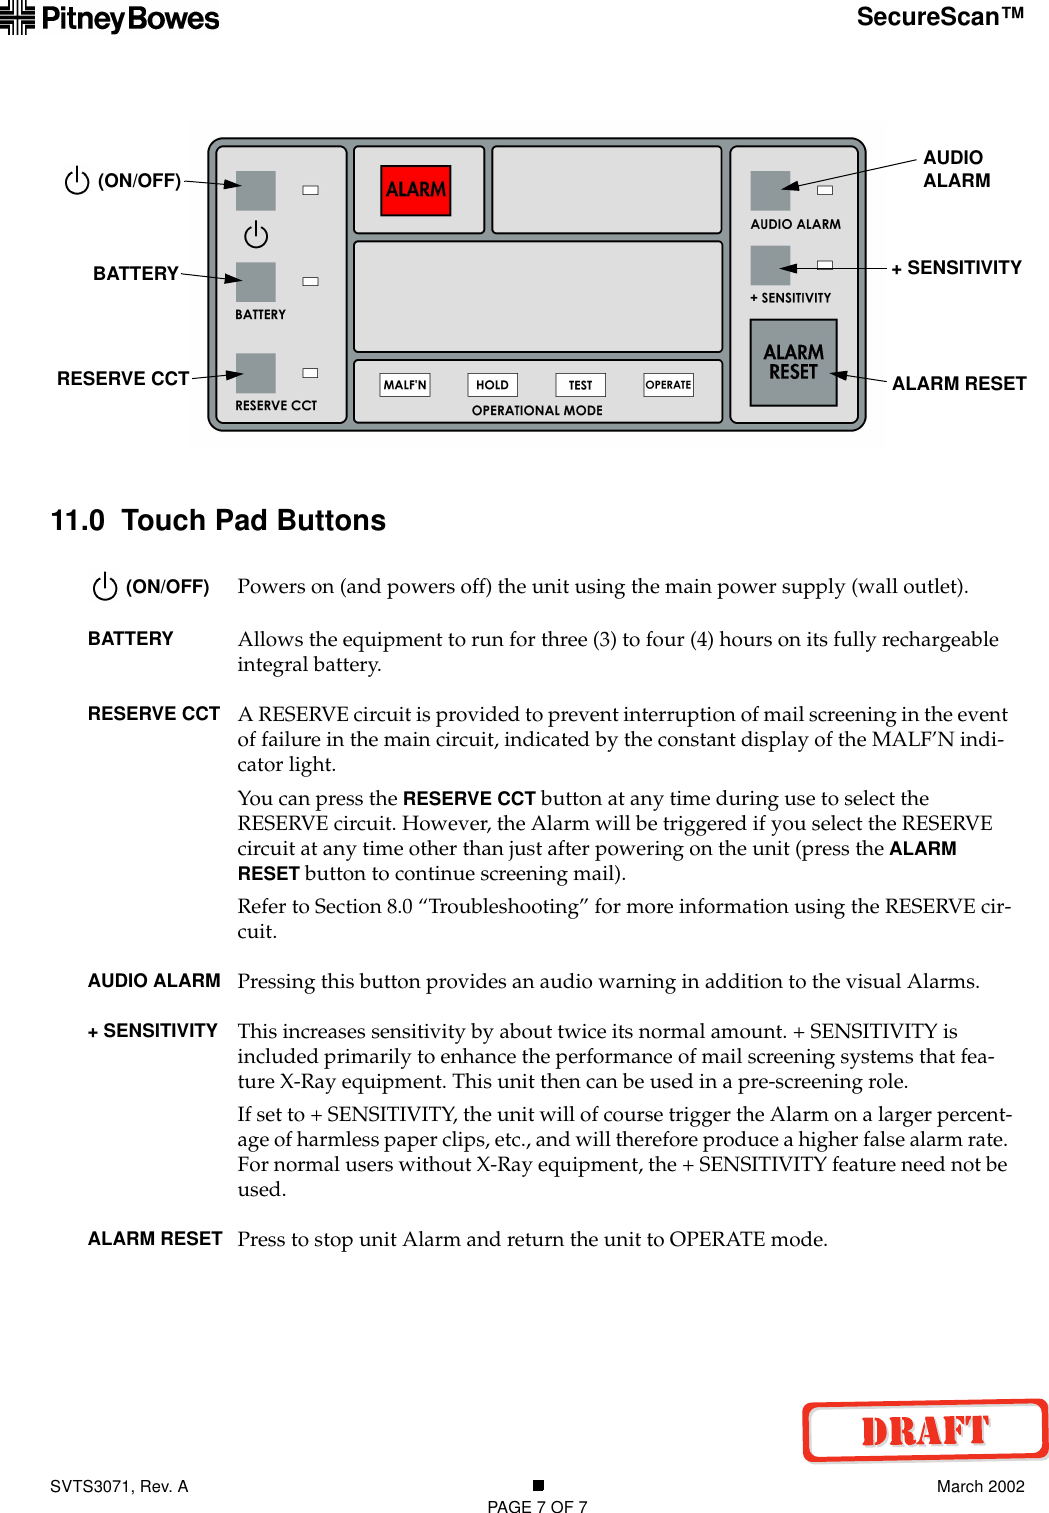 SVTS3071, Rev. A March 2002PAGE 7 OF 7SecureScan™11.0  Touch Pad Buttons (ON/OFF) Powers on (and powers off) the unit using the main power supply (wall outlet).BATTERY Allows the equipment to run for three (3) to four (4) hours on its fully rechargeable integral battery.RESERVE CCT A RESERVE circuit is provided to prevent interruption of mail screening in the event of failure in the main circuit, indicated by the constant display of the MALF’N indi-cator light.You can press the RESERVE CCT button at any time during use to select the RESERVE circuit. However, the Alarm will be triggered if you select the RESERVE circuit at any time other than just after powering on the unit (press the ALARM RESET button to continue screening mail).Refer to Section 8.0 “Troubleshooting” for more information using the RESERVE cir-cuit.AUDIO ALARM Pressing this button provides an audio warning in addition to the visual Alarms.+ SENSITIVITY This increases sensitivity by about twice its normal amount. + SENSITIVITY is included primarily to enhance the performance of mail screening systems that fea-ture X-Ray equipment. This unit then can be used in a pre-screening role.If set to + SENSITIVITY, the unit will of course trigger the Alarm on a larger percent-age of harmless paper clips, etc., and will therefore produce a higher false alarm rate. For normal users without X-Ray equipment, the + SENSITIVITY feature need not be used.ALARM RESET Press to stop unit Alarm and return the unit to OPERATE mode.AUDIO ALARM+ SENSITIVITY (ON/OFF)BATTERYRESERVE CCT ALARM RESET